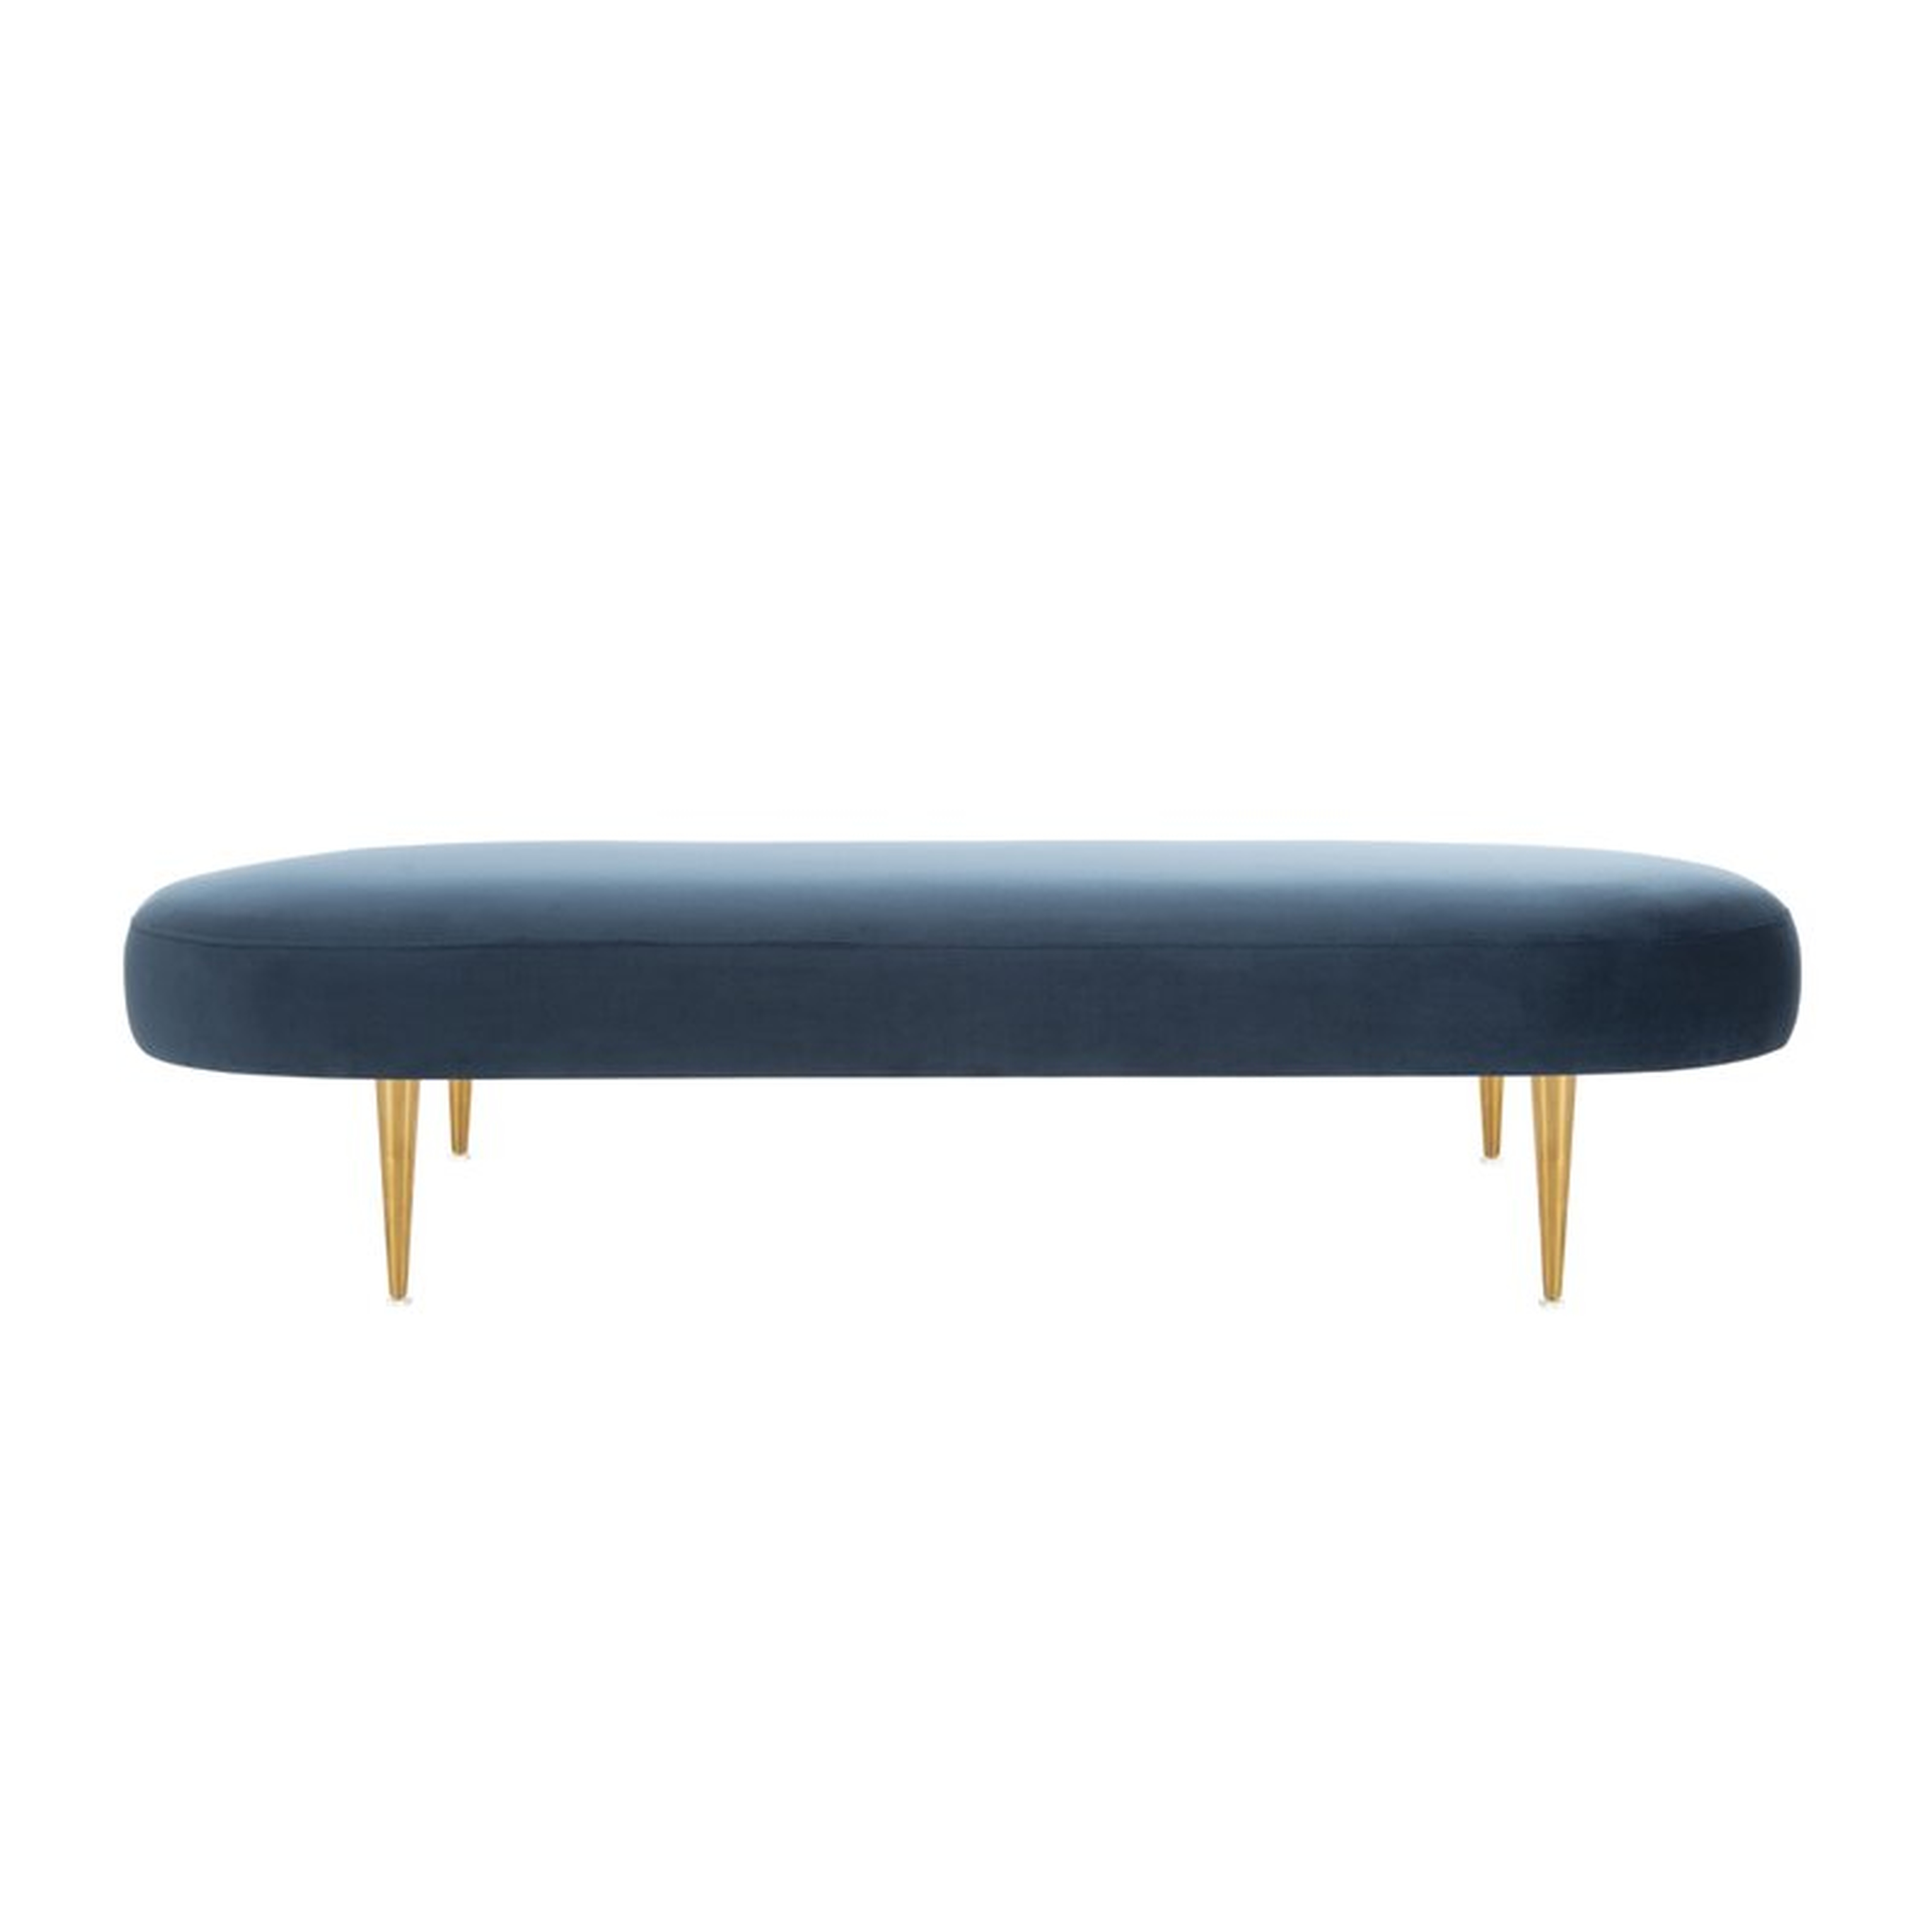 Safavieh Couture Upholstered Bench Upholstery: Navy - Perigold